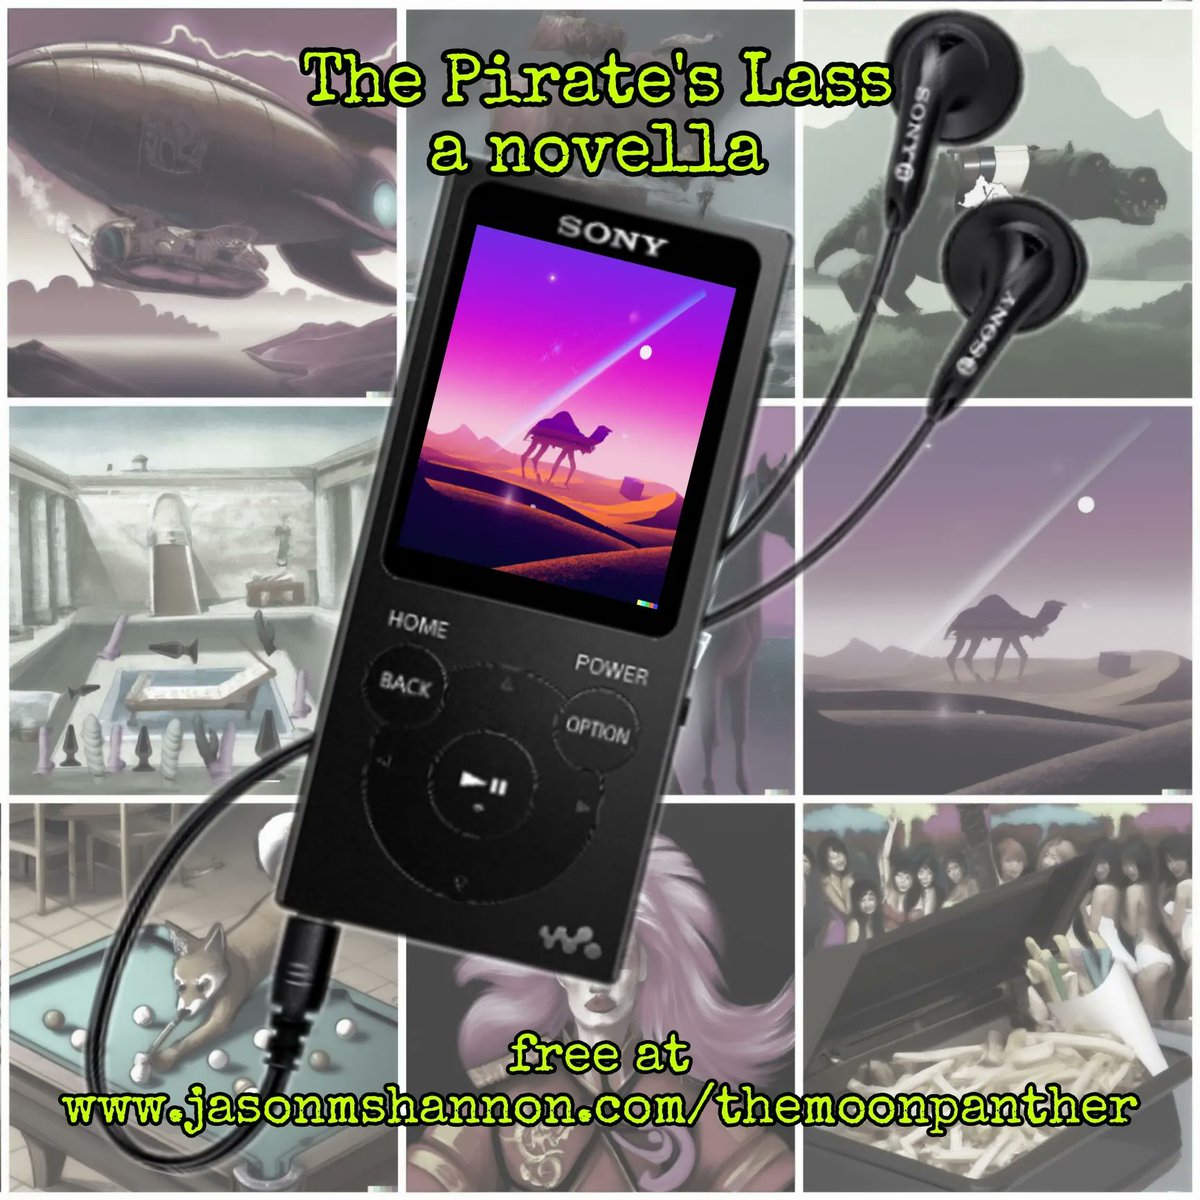 3 hours of free content! Check out this audiobook in profile→website

Ebooks/audiobooks available on my website store. See linktree for details.

#IndieAuthorCommunity
#SelfPublished
#WriterCommunity
#IndiePublishing
#IndieBookworm
#femaleprotagonist
#lgbtqfiction